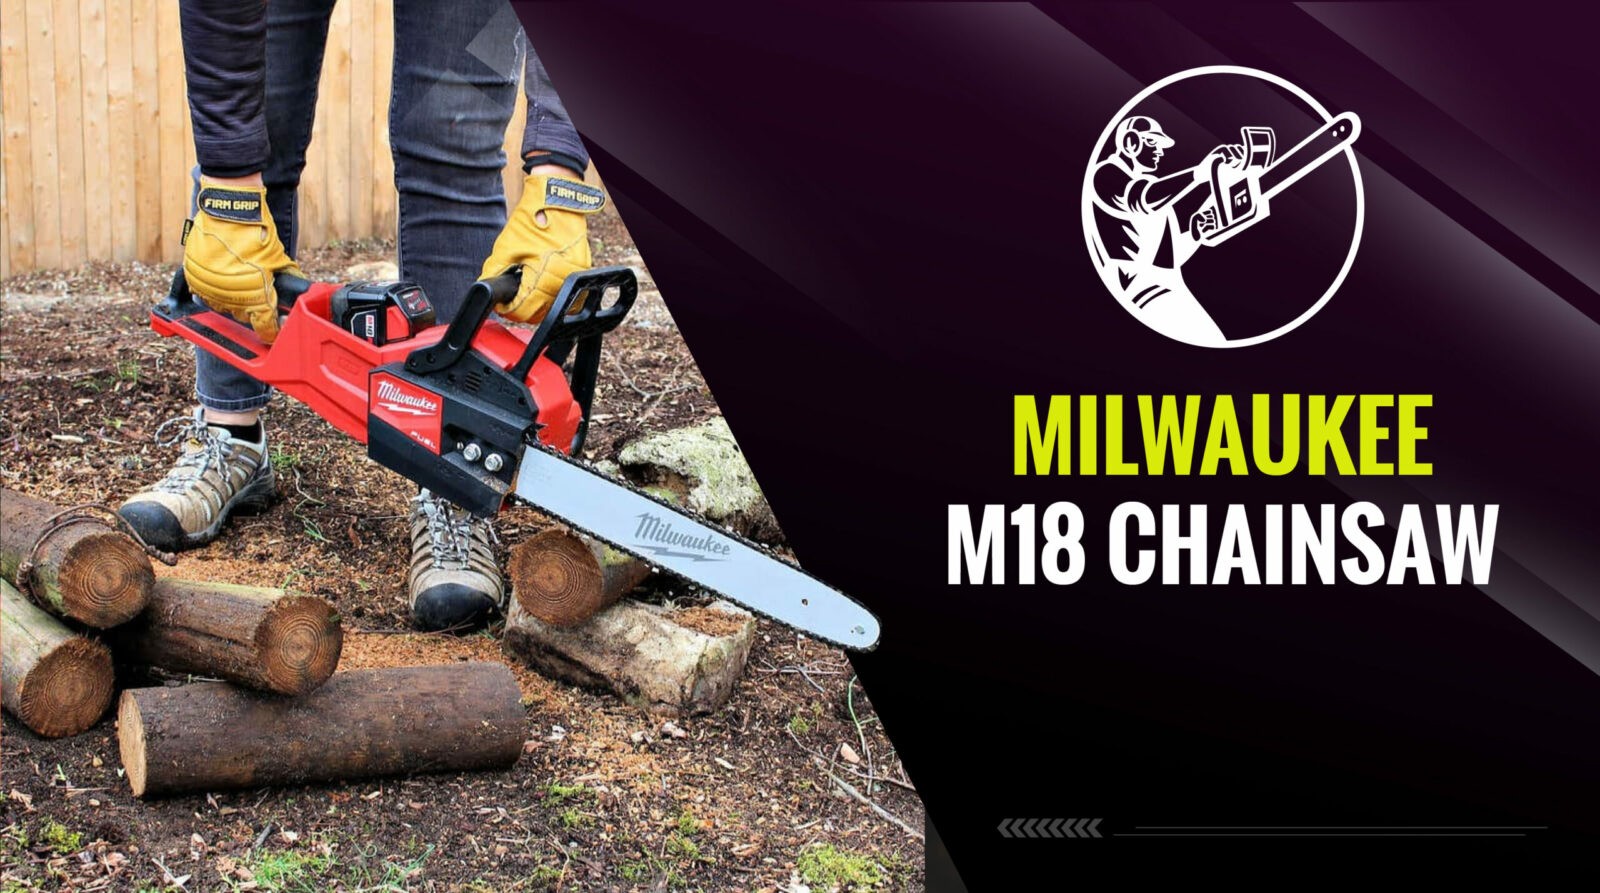 Milwaukee M18 Chainsaw – All About This Chainsaw